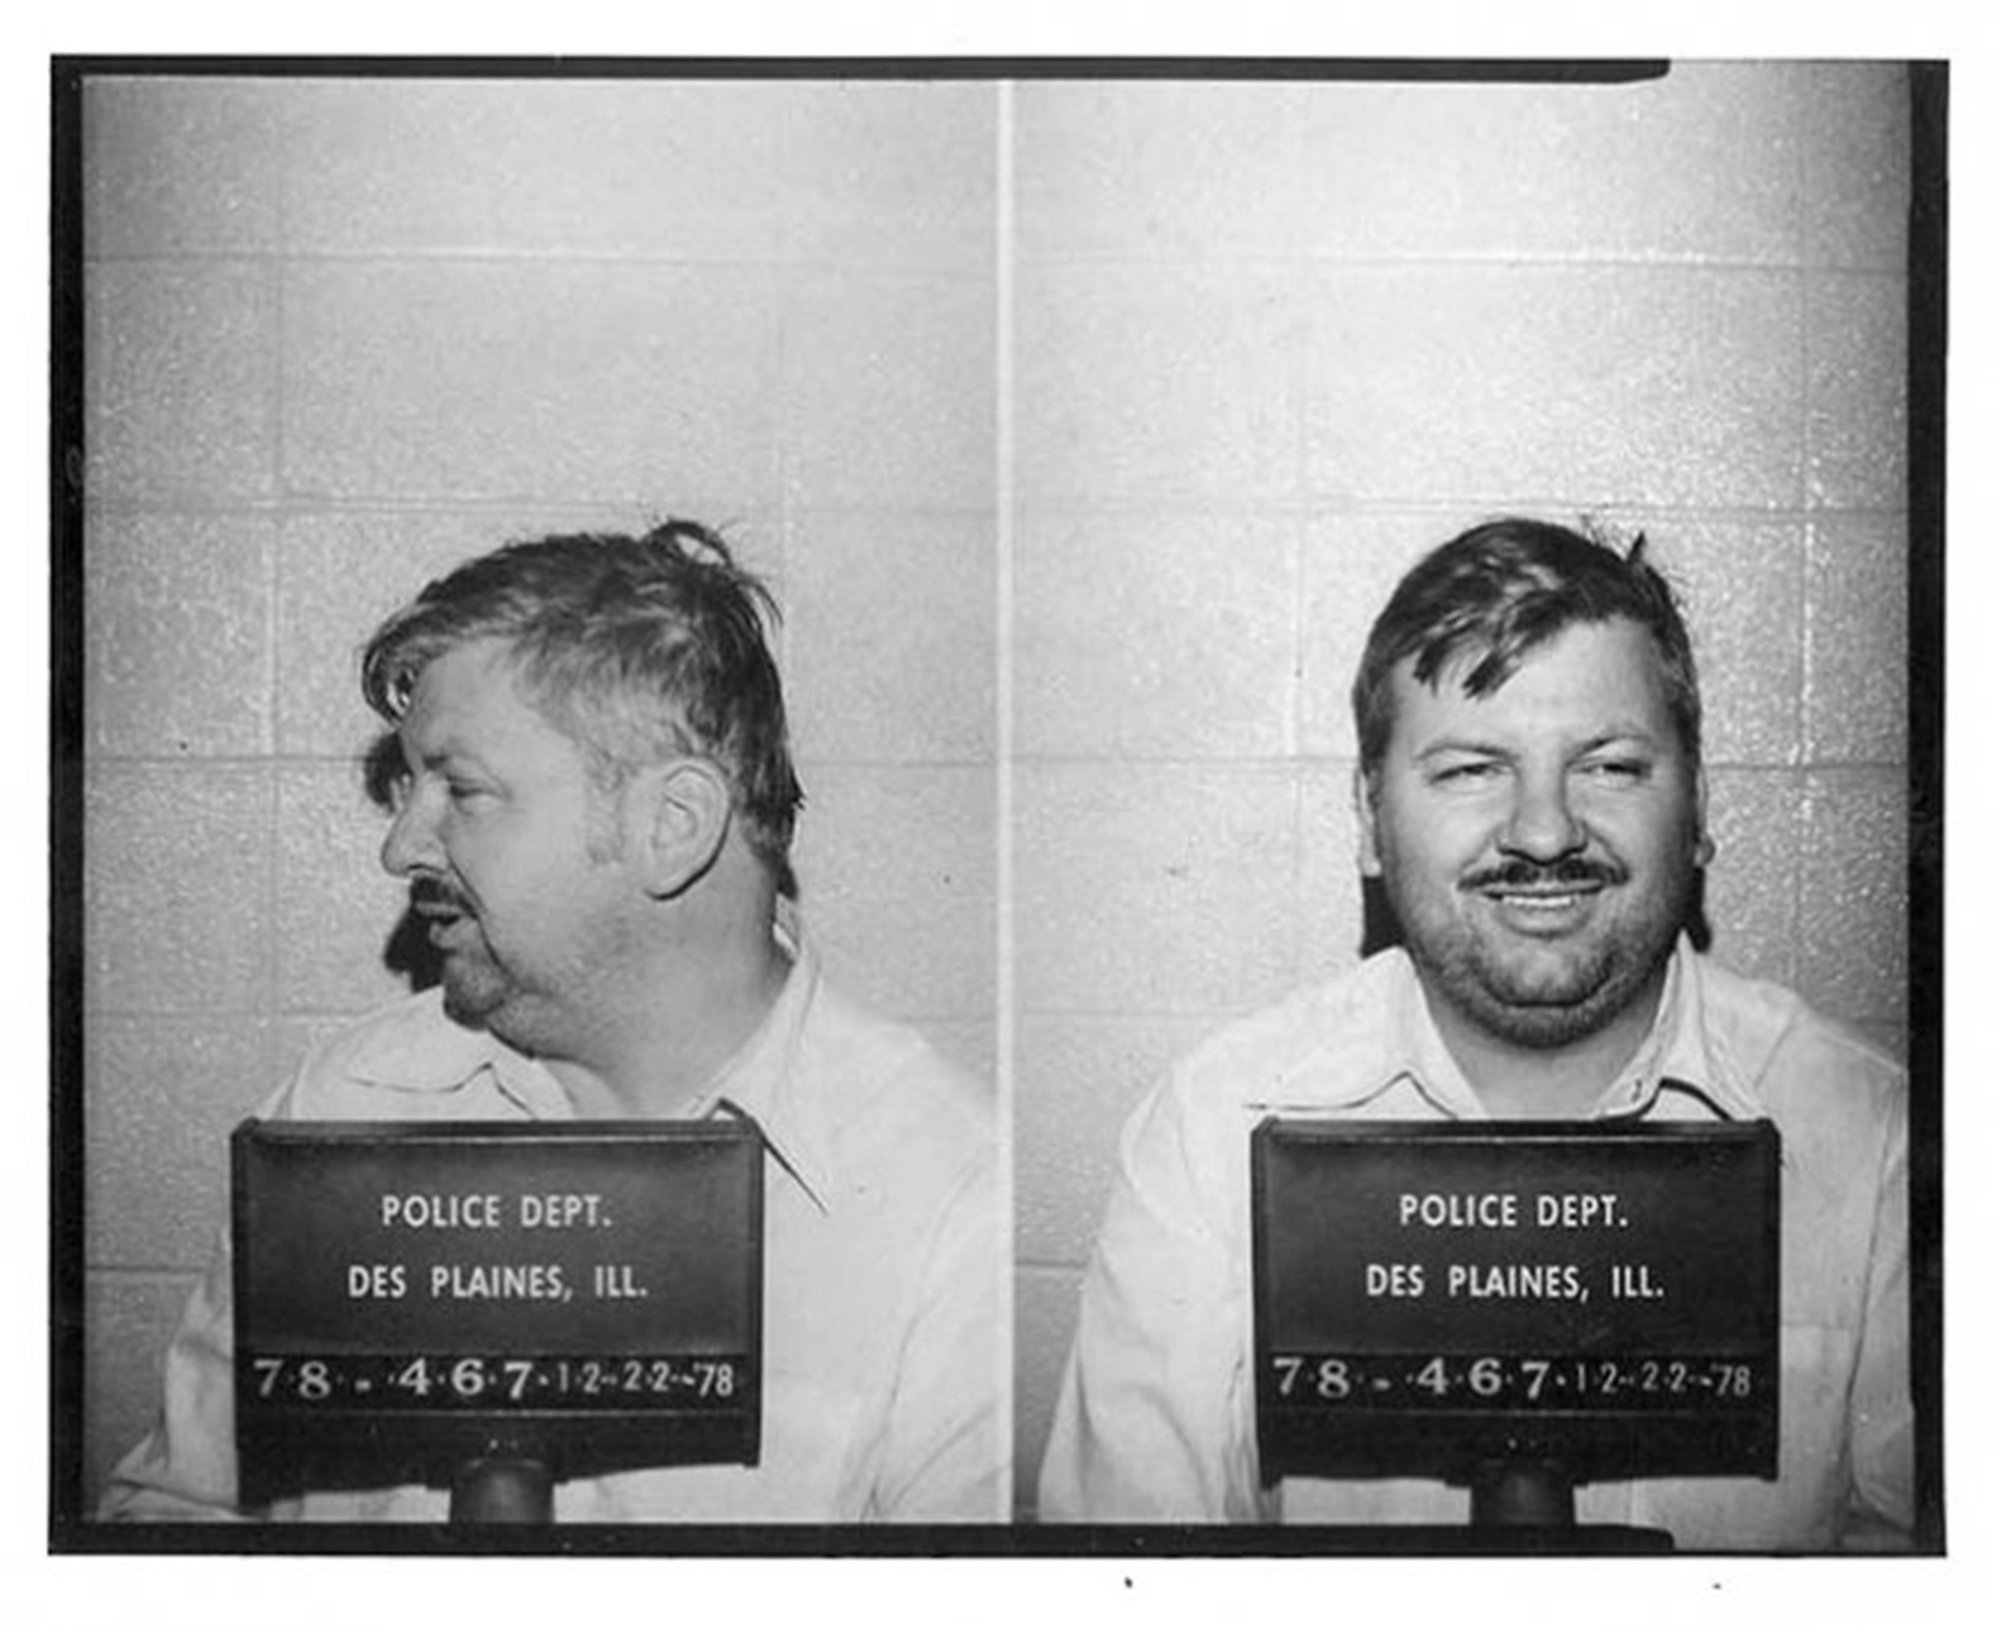 John Wayne Gacy in the location of Des Plaines, Illinois in his mug shot